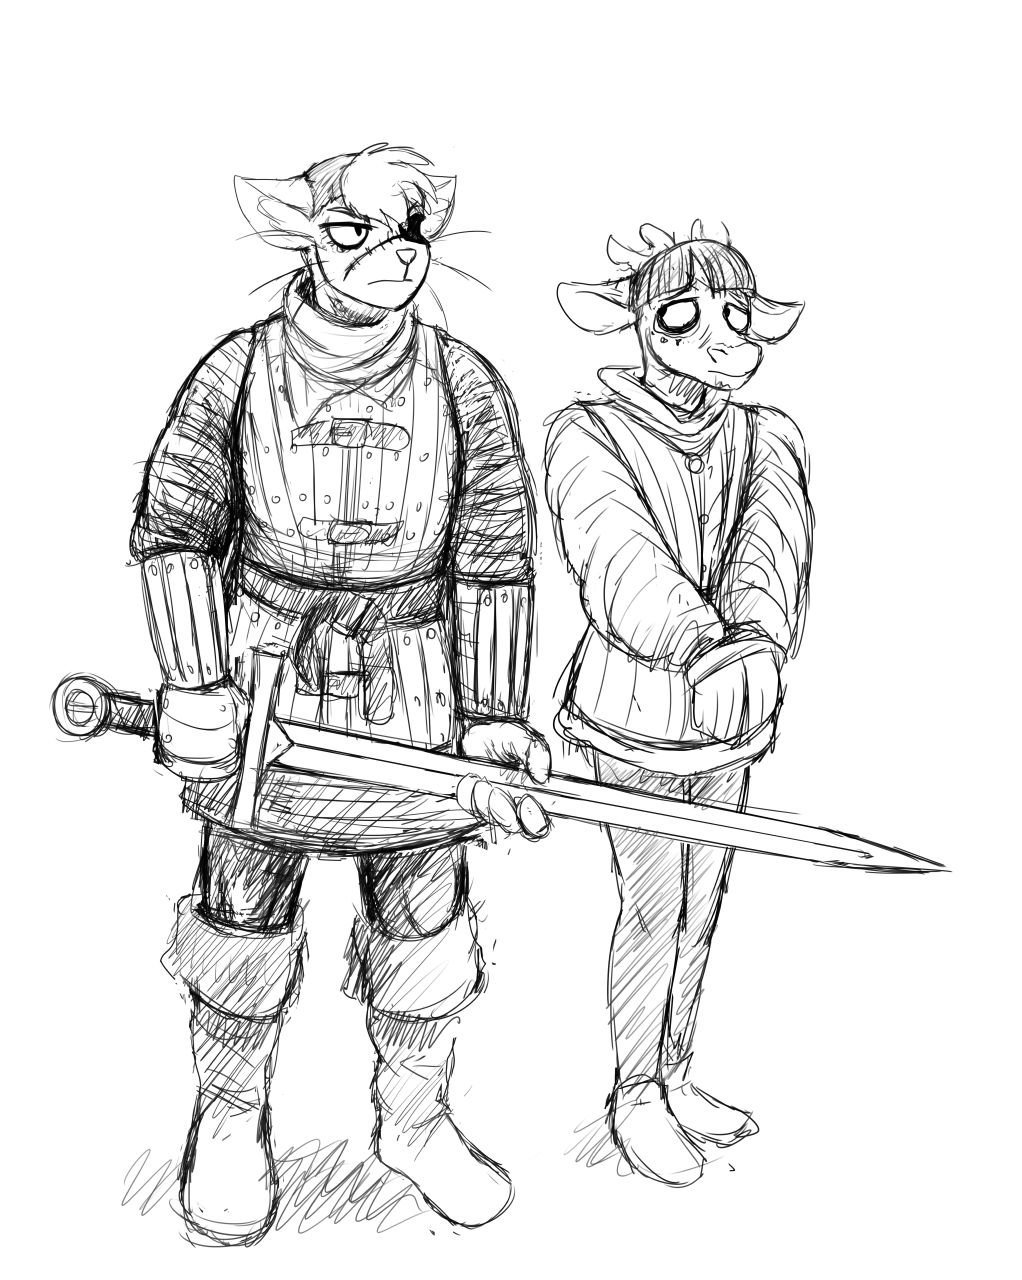 cat knight and deer prince - 15